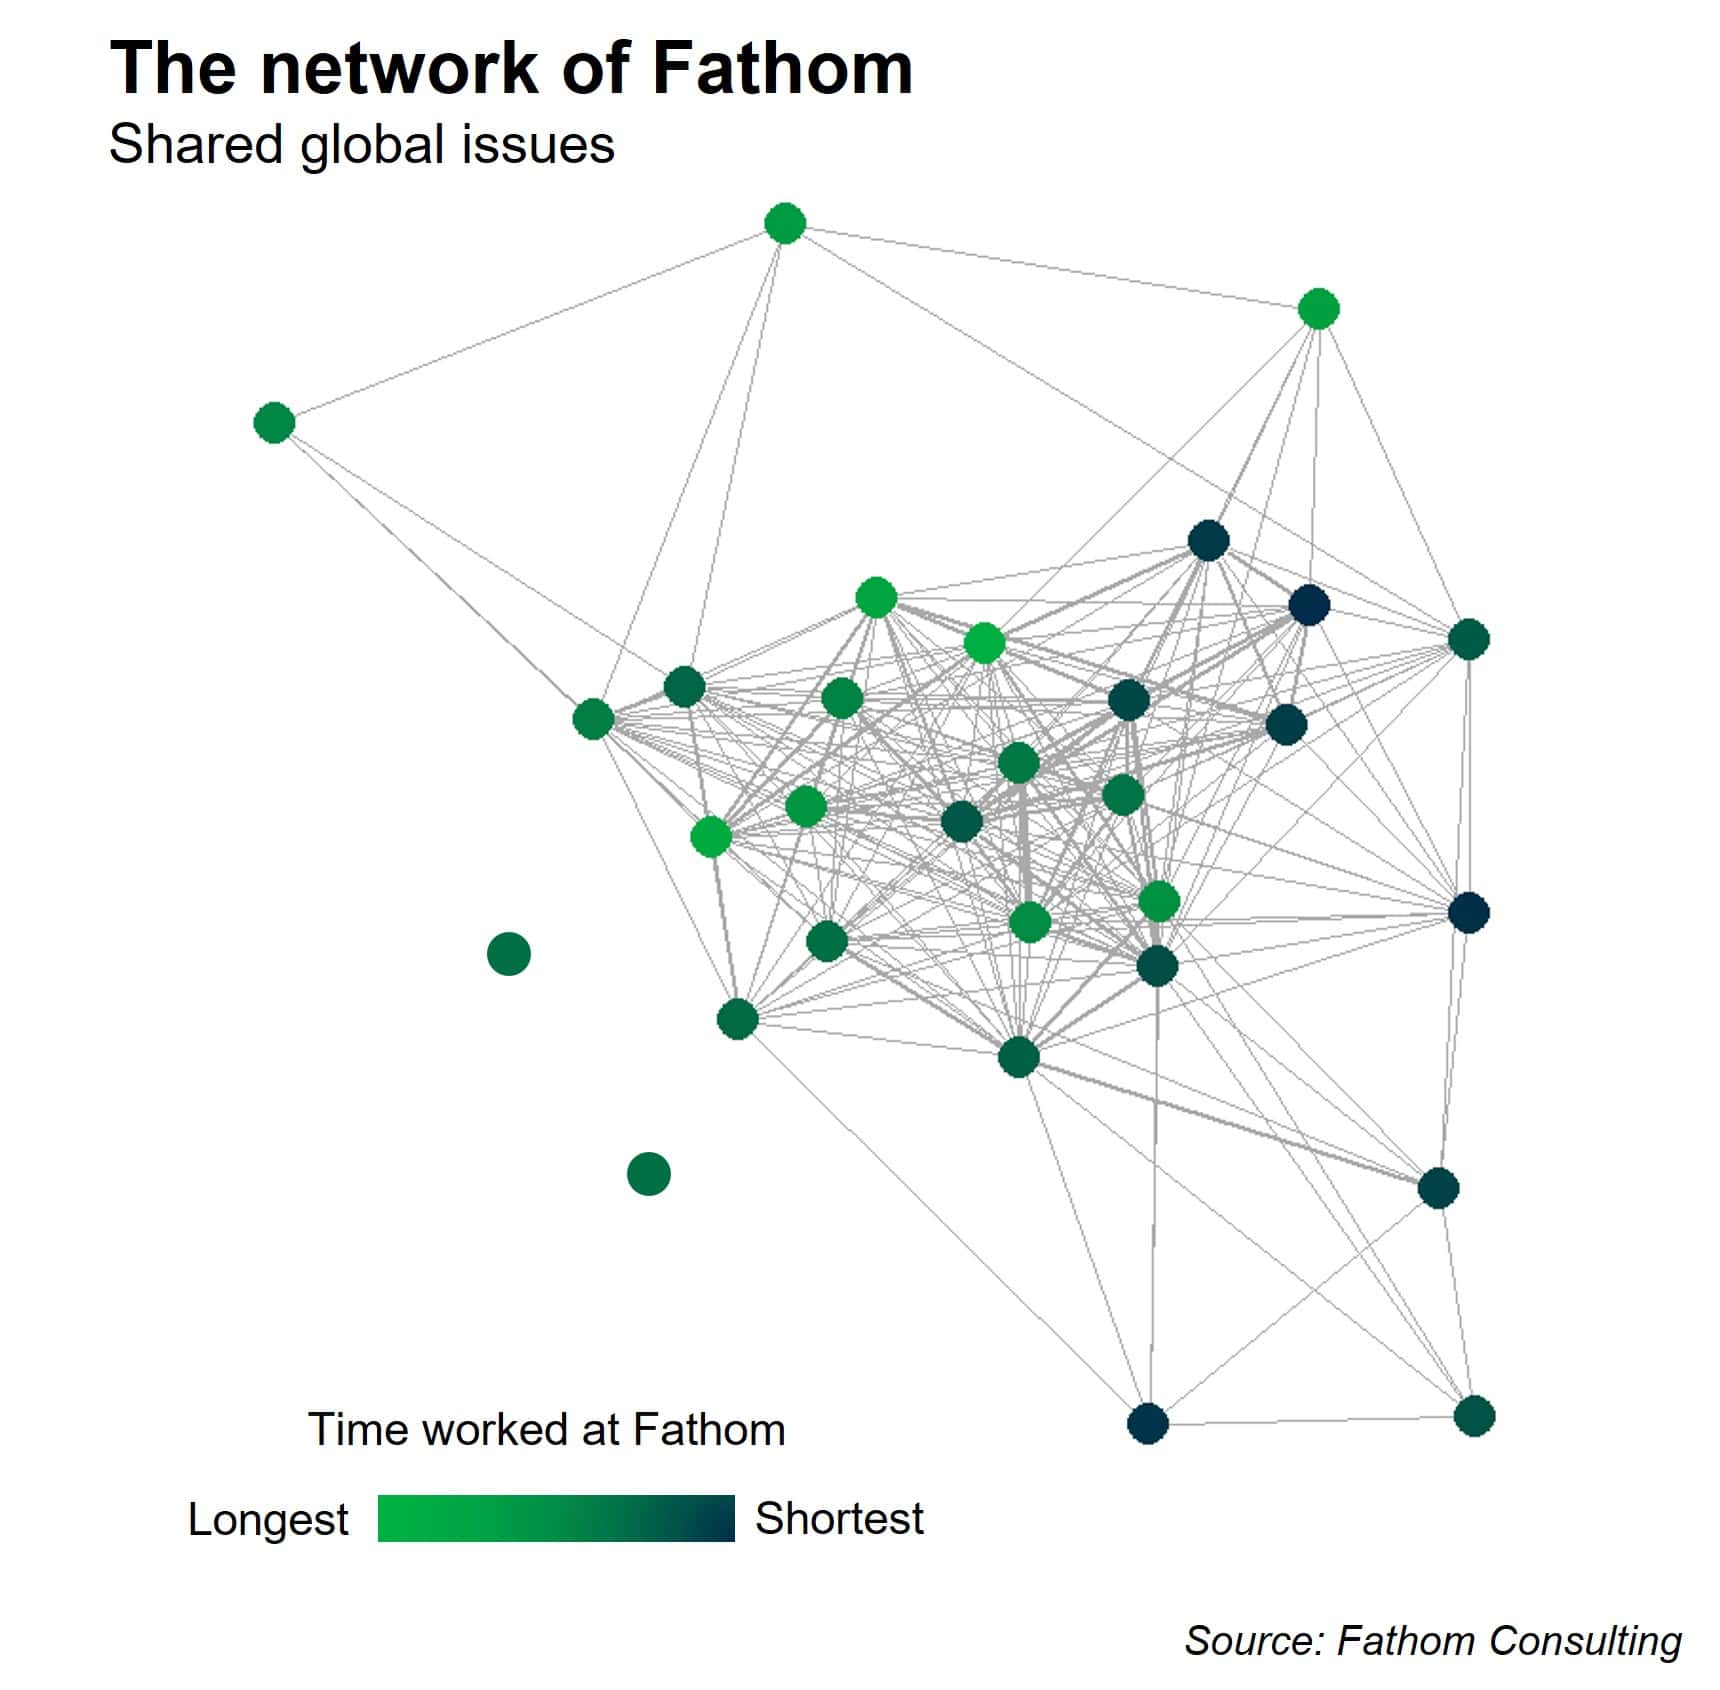 Shared global issues, by Fathomite, depending on topic connection and length of service